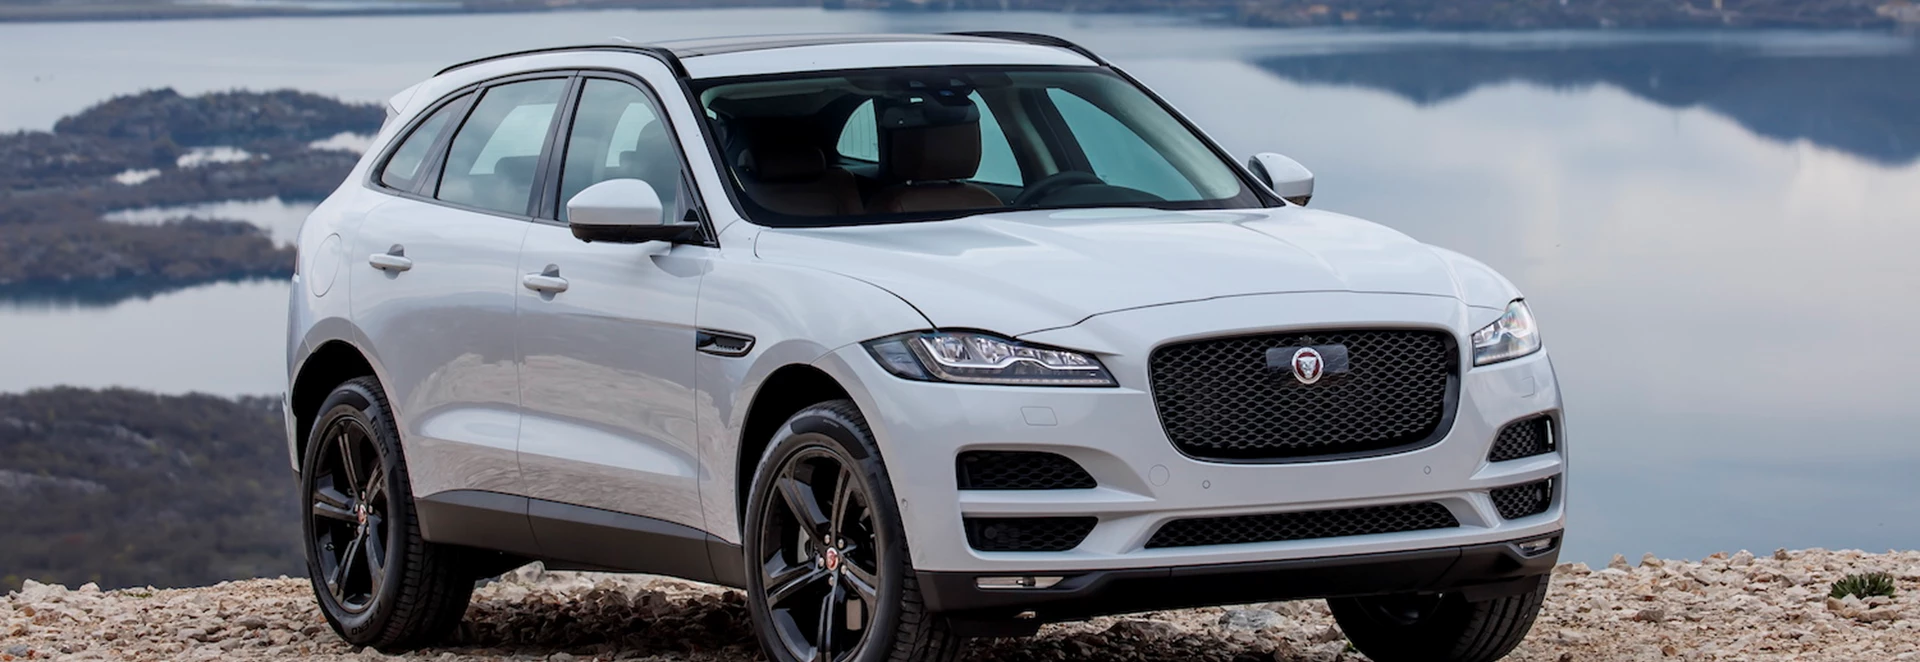 5 Things you didn't know about the 2019 Jaguar F-Pace